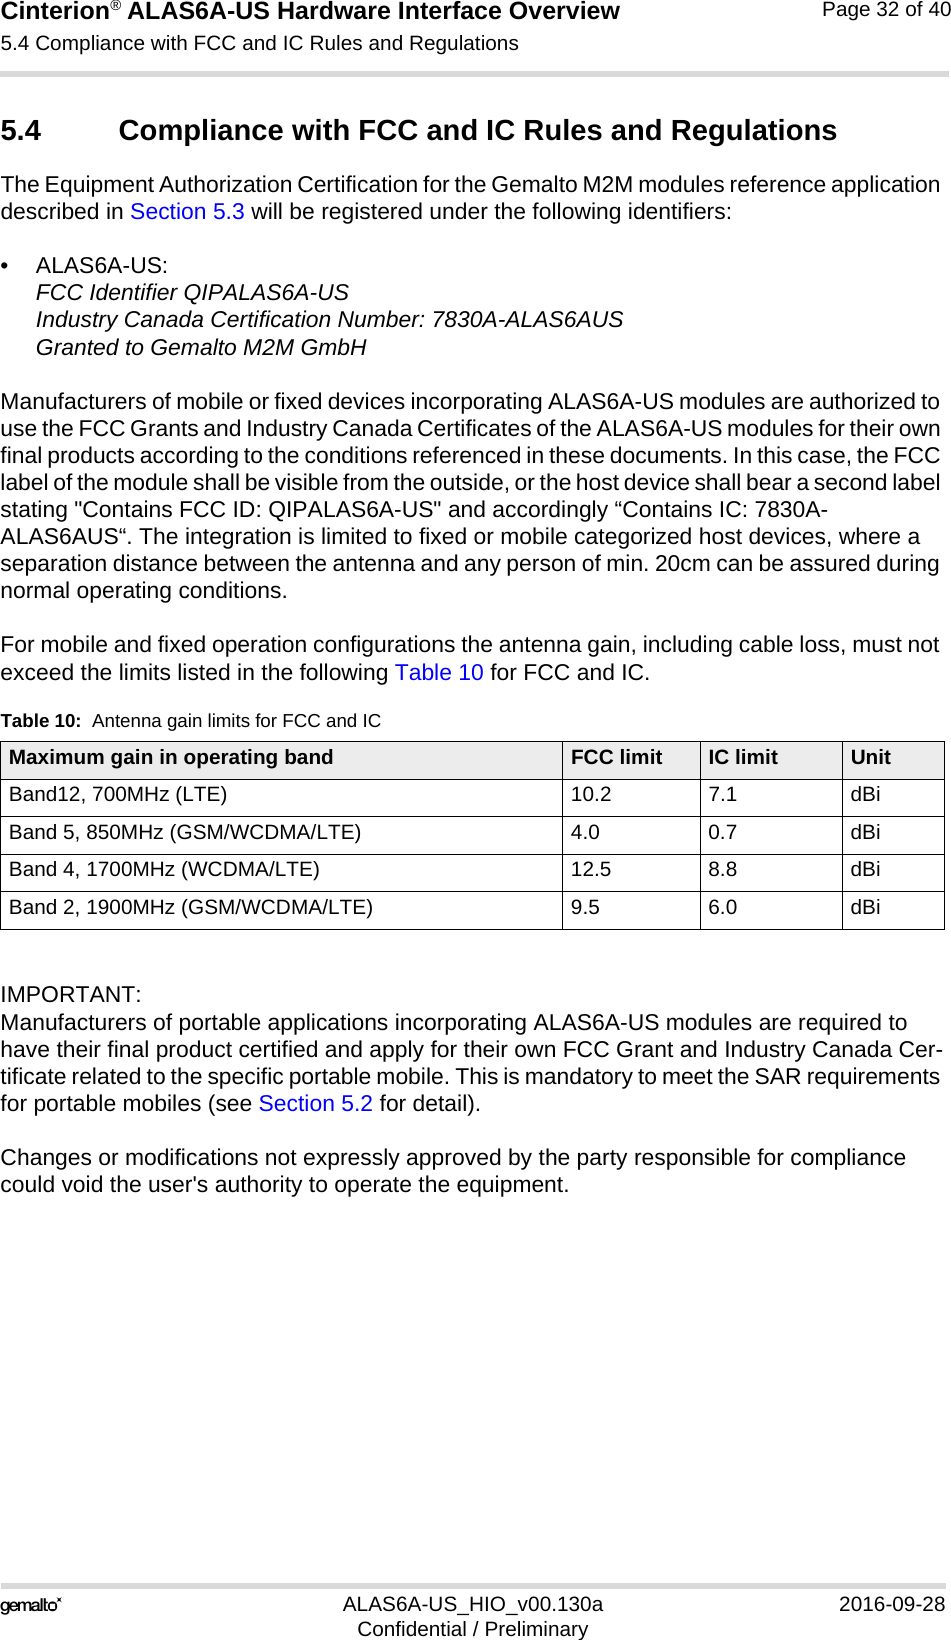 Cinterion® ALAS6A-US Hardware Interface Overview5.4 Compliance with FCC and IC Rules and Regulations33ALAS6A-US_HIO_v00.130a 2016-09-28Confidential / PreliminaryPage 32 of 405.4 Compliance with FCC and IC Rules and Regulations The Equipment Authorization Certification for the Gemalto M2M modules reference application described in Section 5.3 will be registered under the following identifiers:• ALAS6A-US:FCC Identifier QIPALAS6A-USIndustry Canada Certification Number: 7830A-ALAS6AUSGranted to Gemalto M2M GmbH Manufacturers of mobile or fixed devices incorporating ALAS6A-US modules are authorized to use the FCC Grants and Industry Canada Certificates of the ALAS6A-US modules for their own final products according to the conditions referenced in these documents. In this case, the FCC label of the module shall be visible from the outside, or the host device shall bear a second label stating &quot;Contains FCC ID: QIPALAS6A-US&quot; and accordingly “Contains IC: 7830A-ALAS6AUS“. The integration is limited to fixed or mobile categorized host devices, where a separation distance between the antenna and any person of min. 20cm can be assured during normal operating conditions. For mobile and fixed operation configurations the antenna gain, including cable loss, must not exceed the limits listed in the following Table 10 for FCC and IC.IMPORTANT:Manufacturers of portable applications incorporating ALAS6A-US modules are required to have their final product certified and apply for their own FCC Grant and Industry Canada Cer-tificate related to the specific portable mobile. This is mandatory to meet the SAR requirements for portable mobiles (see Section 5.2 for detail).Changes or modifications not expressly approved by the party responsible for compliance could void the user&apos;s authority to operate the equipment.Table 10:  Antenna gain limits for FCC and ICMaximum gain in operating band FCC limit IC limit UnitBand12, 700MHz (LTE) 10.2 7.1 dBiBand 5, 850MHz (GSM/WCDMA/LTE) 4.0 0.7 dBiBand 4, 1700MHz (WCDMA/LTE) 12.5 8.8 dBiBand 2, 1900MHz (GSM/WCDMA/LTE) 9.5 6.0 dBi